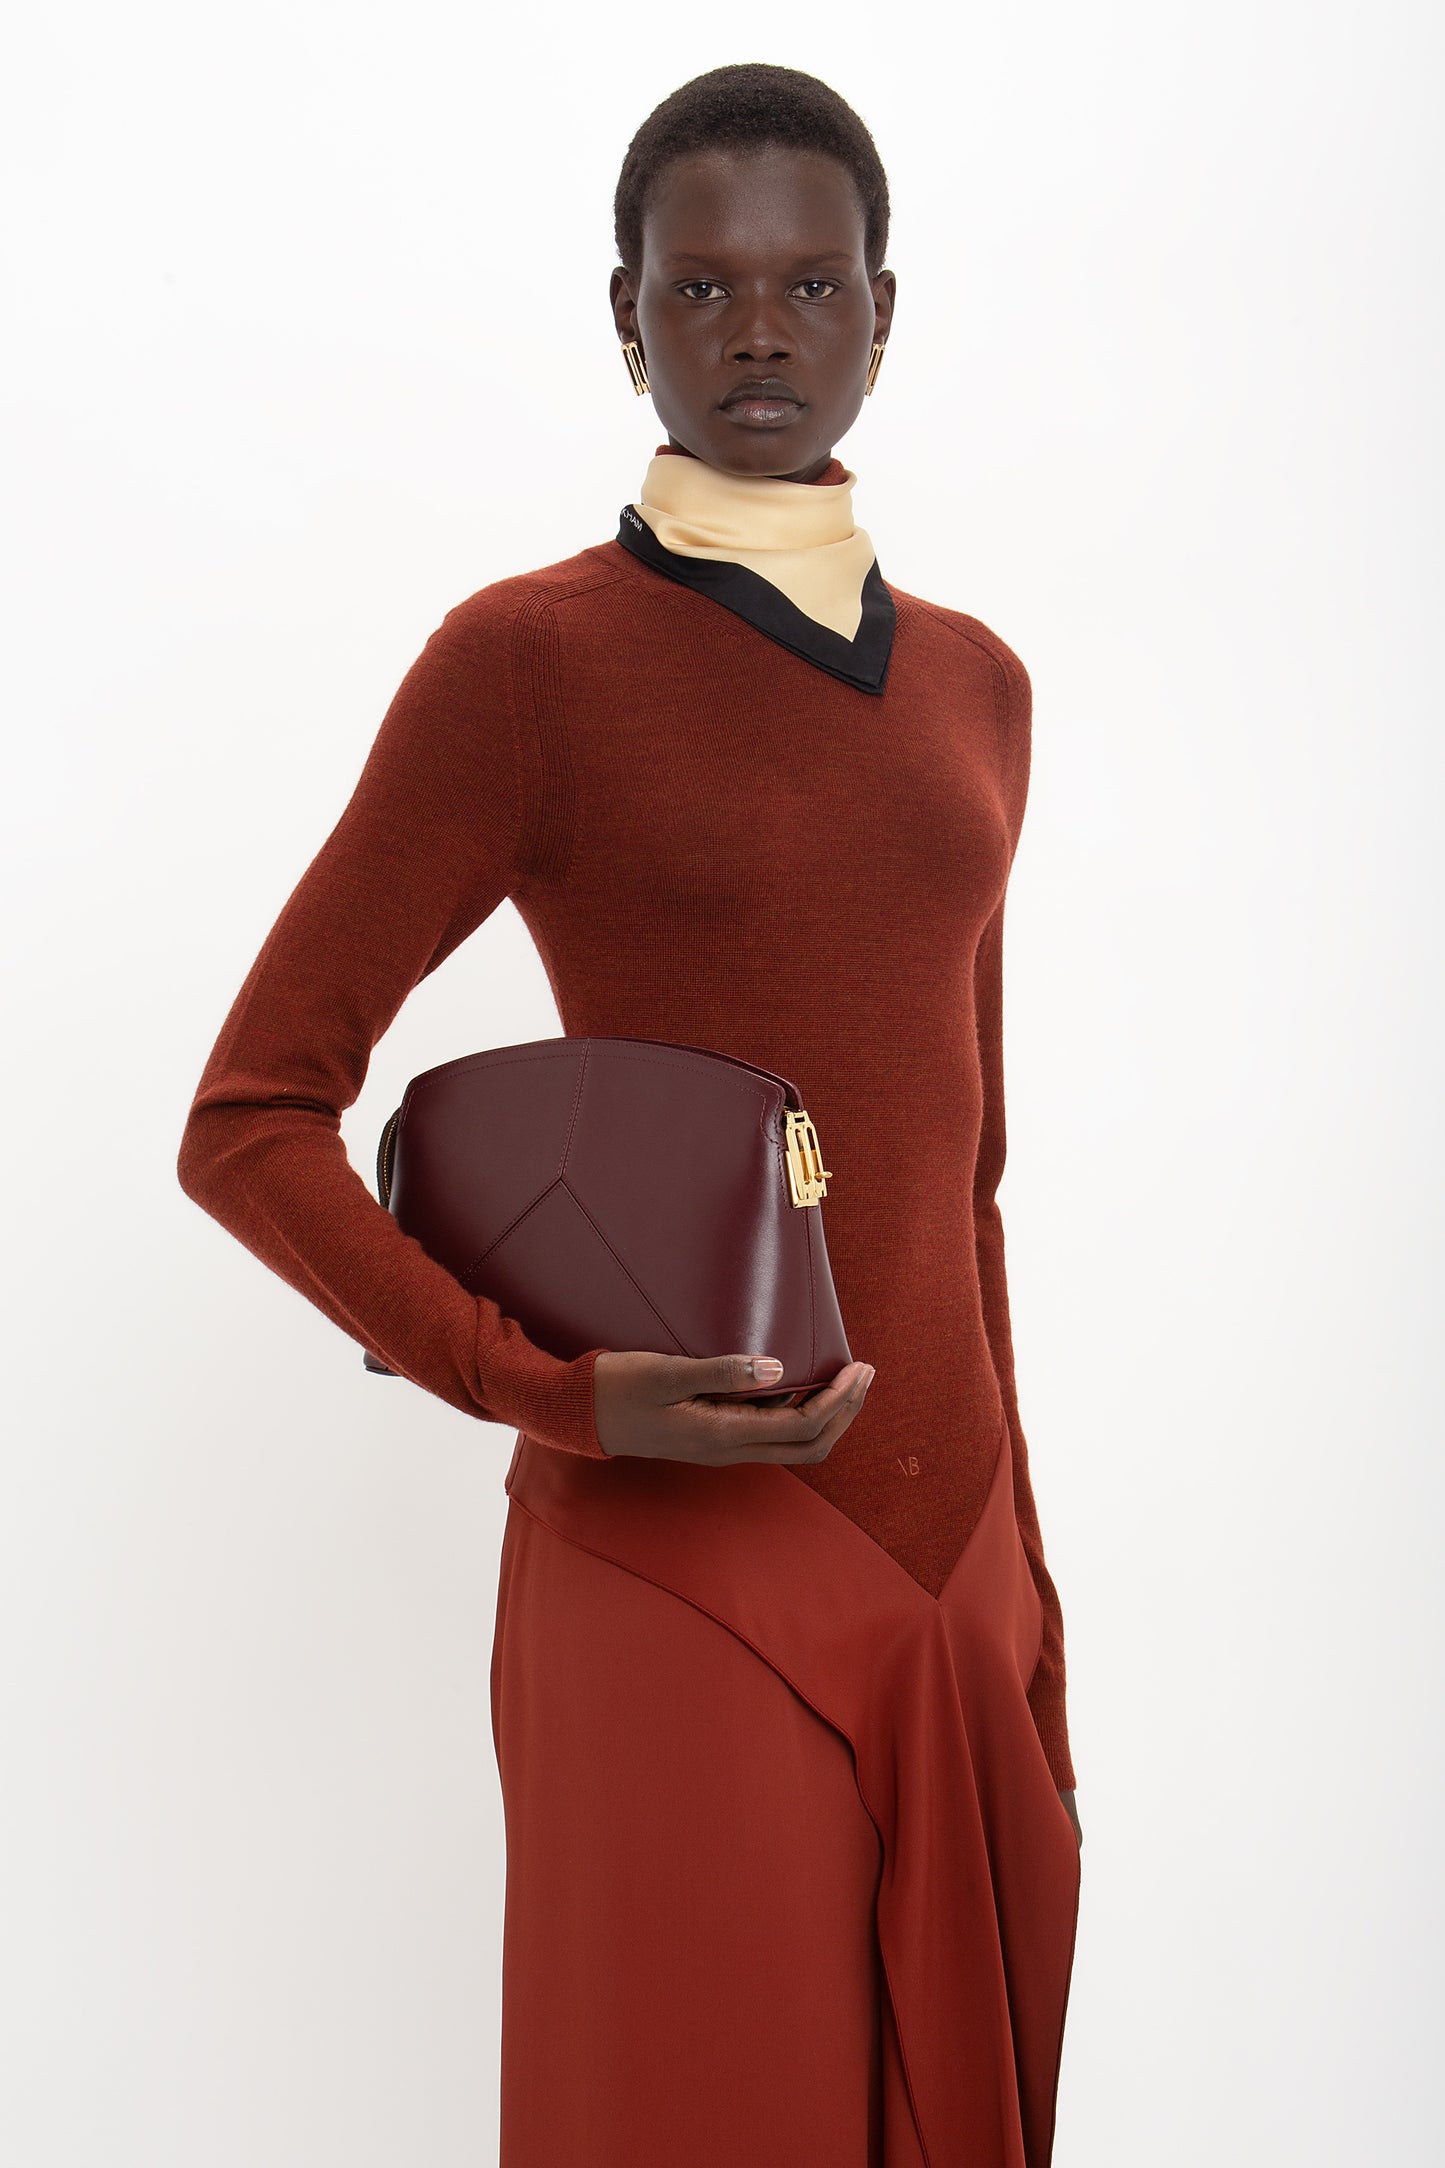 A person wearing a High Neck Tie Detail Dress In Russet by Victoria Beckham and carrying a maroon handbag stands against a white background.